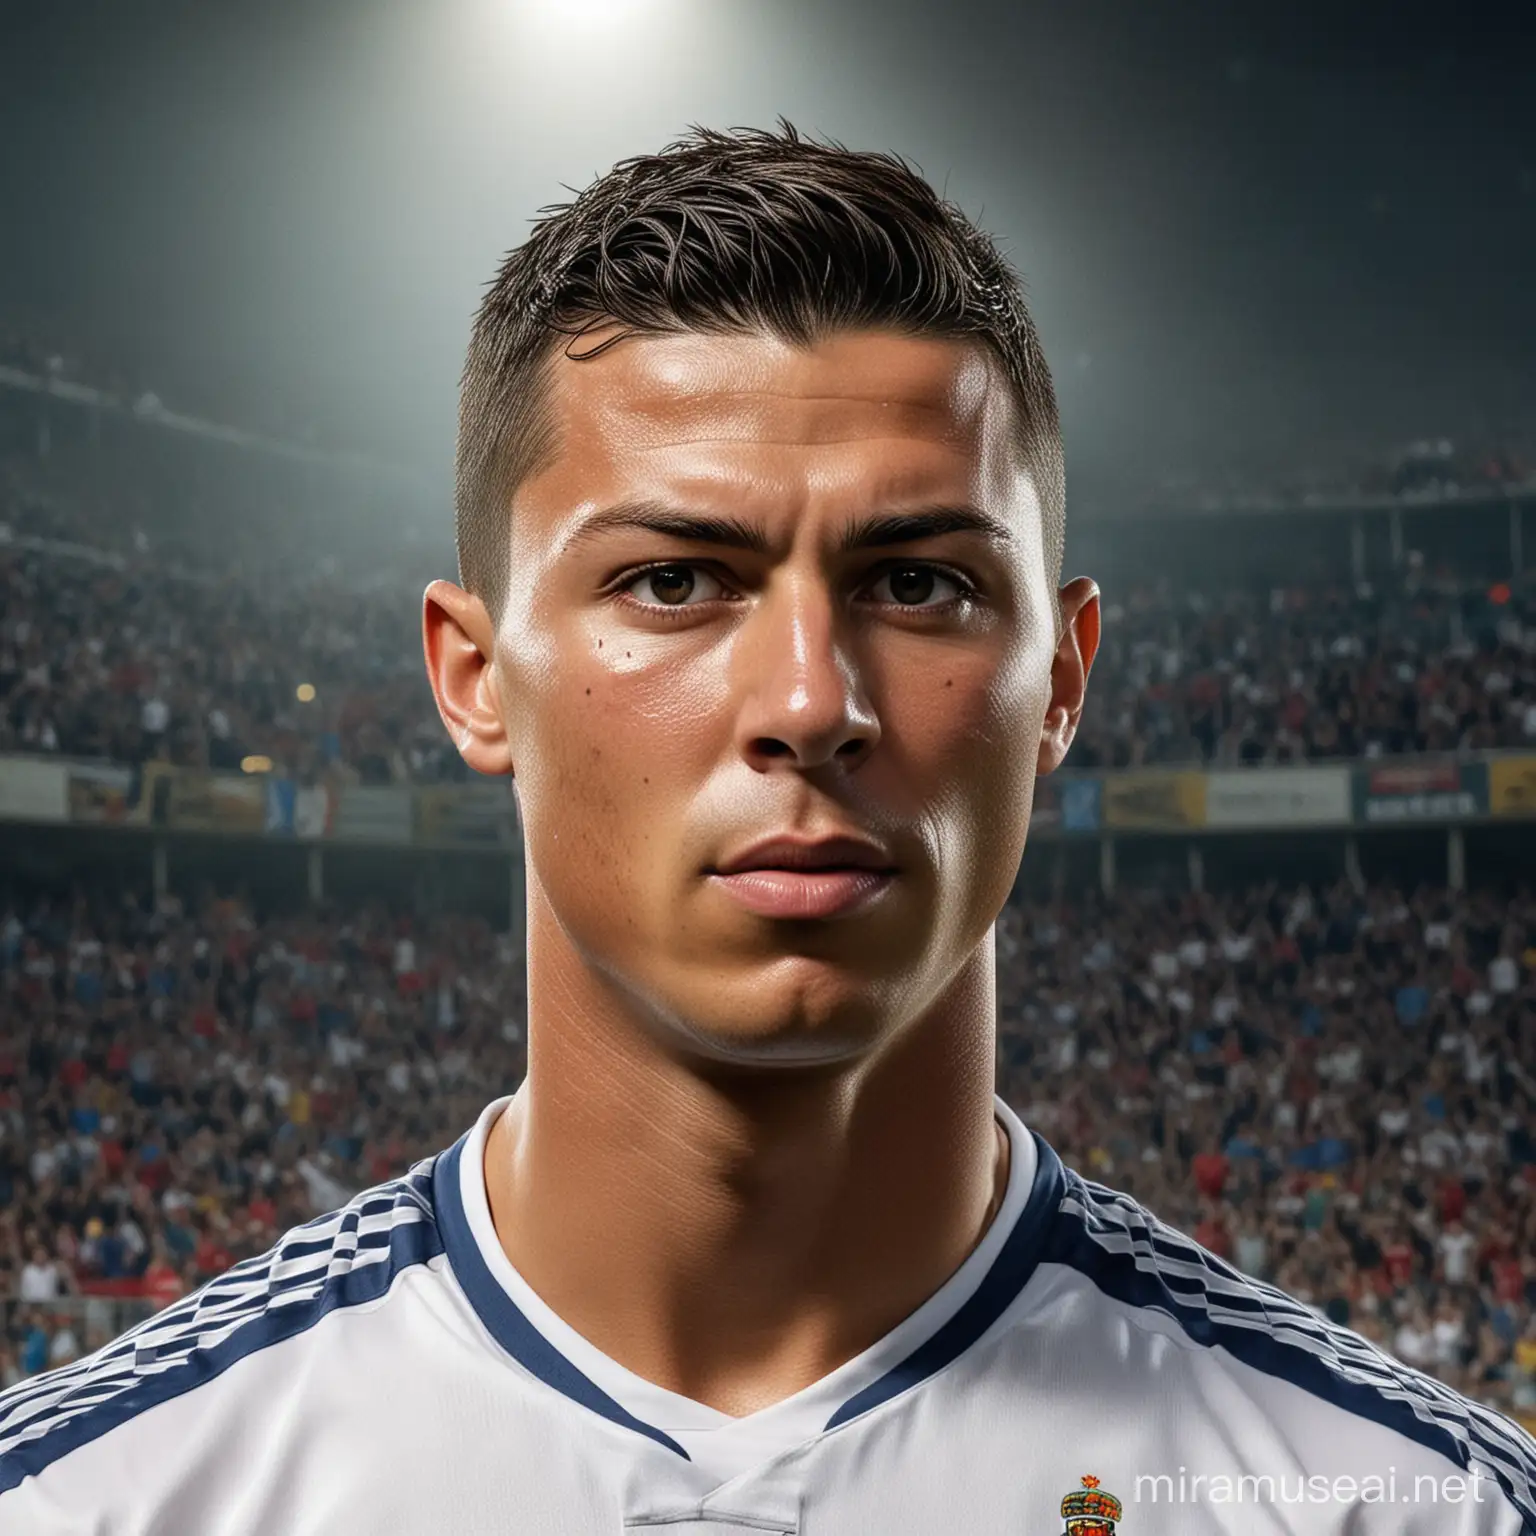 "10. The Champion's Gaze: Capture the determination and focus in Ronaldo's eyes as he leads his team to victory, ready to conquer any challenge on the playground."



"9. Legendary Leadership: Strike a pose showcasing leadership qualities, inspired by Ronaldo's captaincy and guidance on the field."



